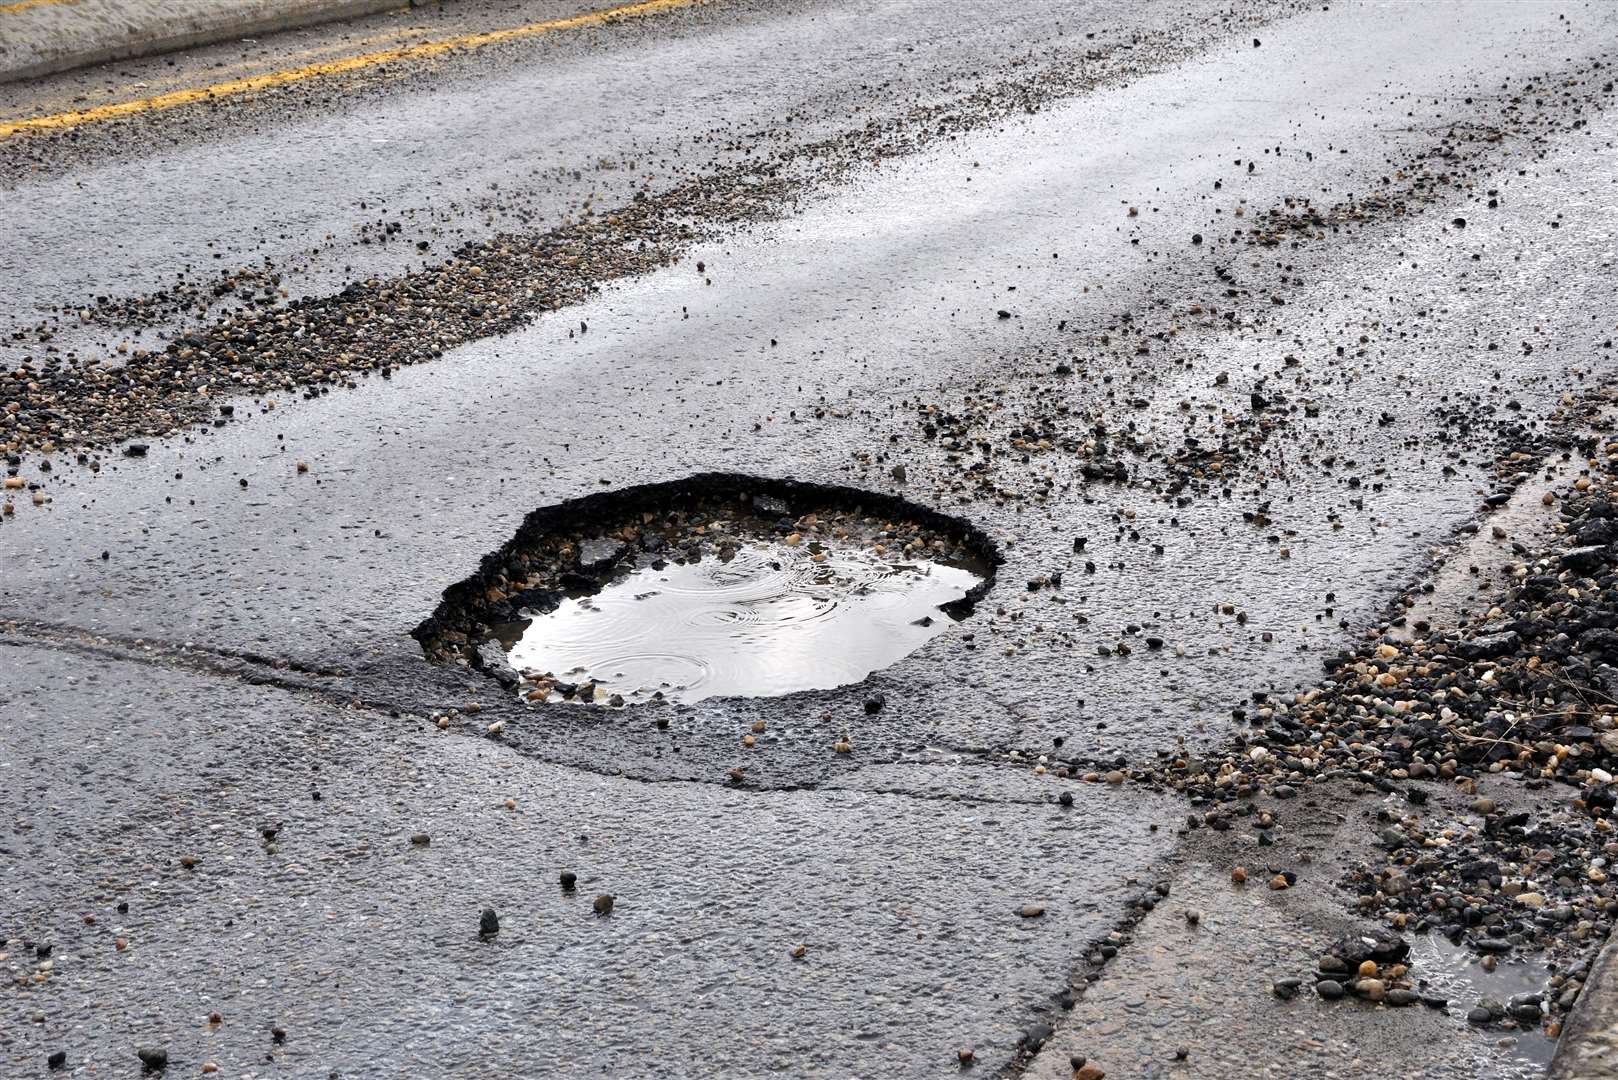 The number of deaths and serious injuries due to potholes in Kent has been revealed